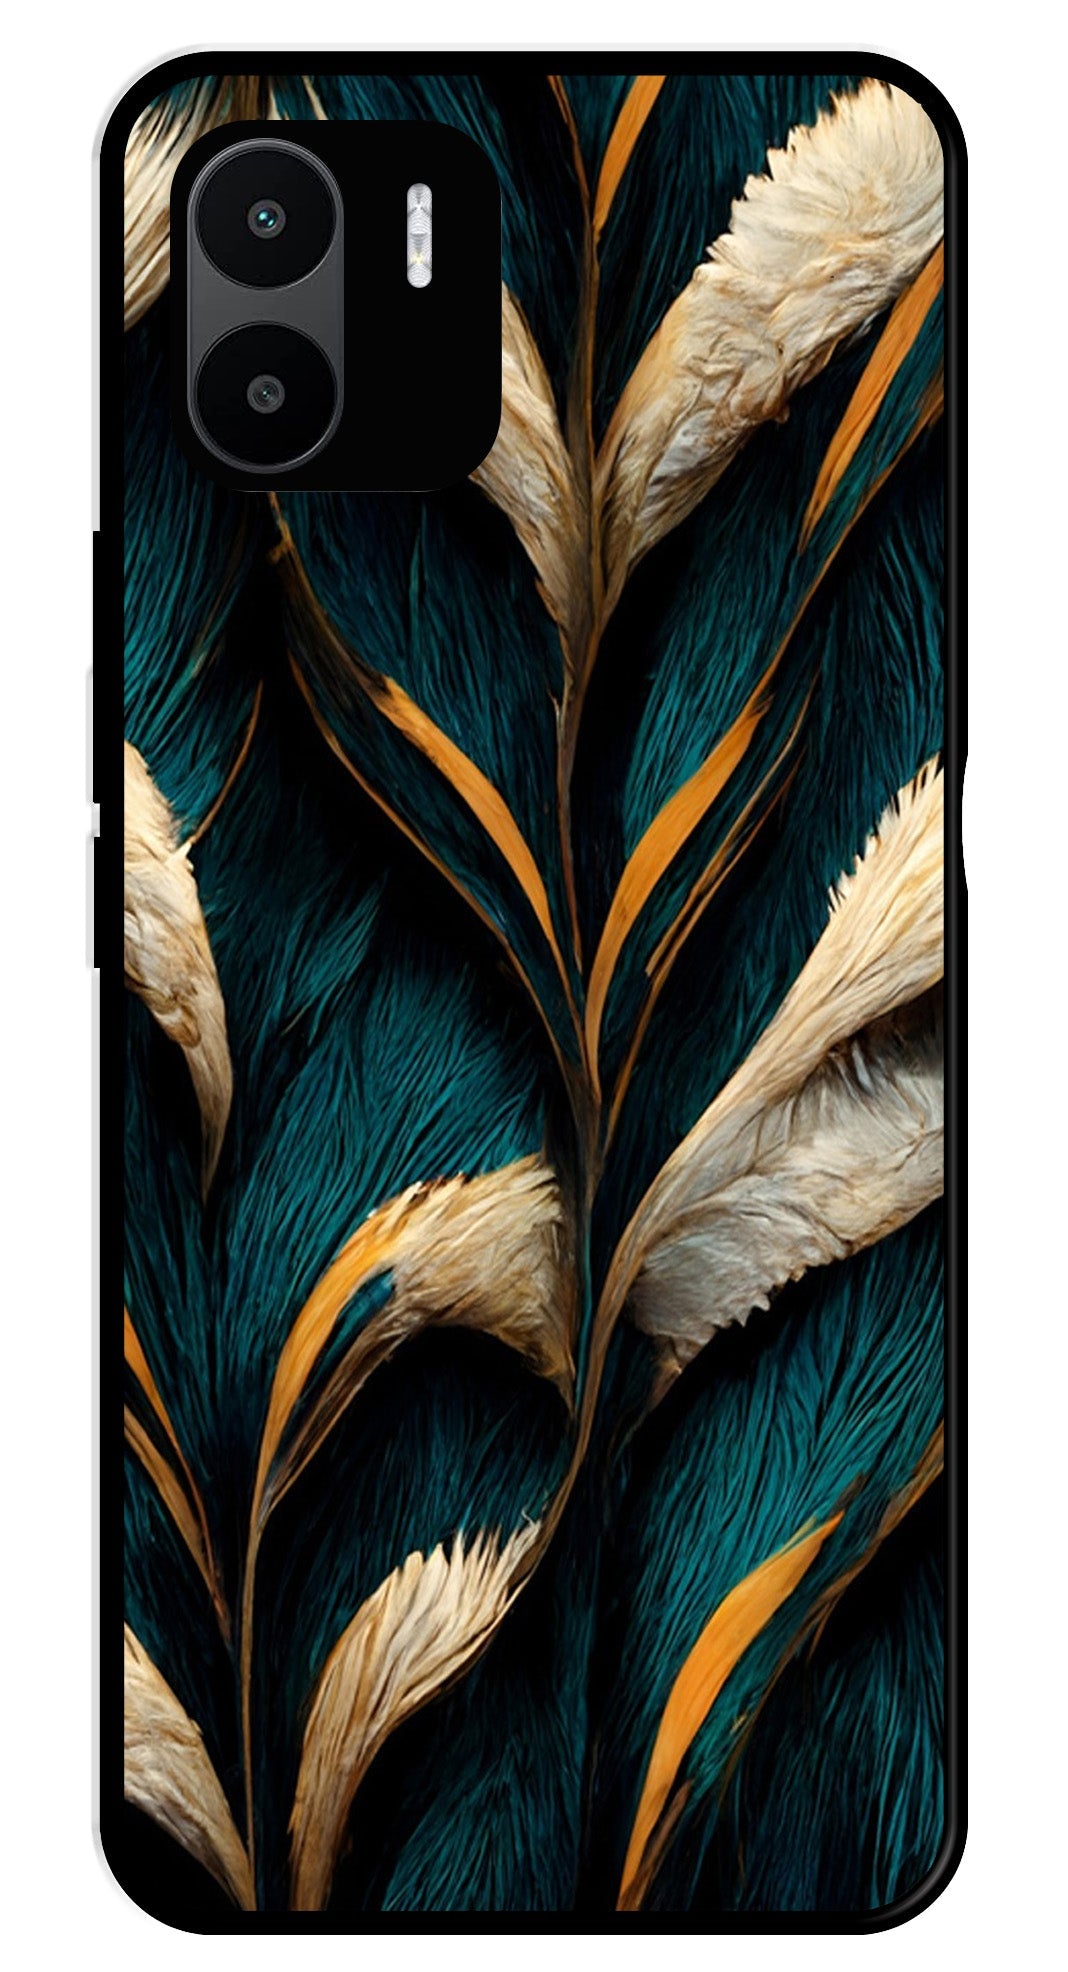 Feathers Metal Mobile Case for Redmi A1   (Design No -30)